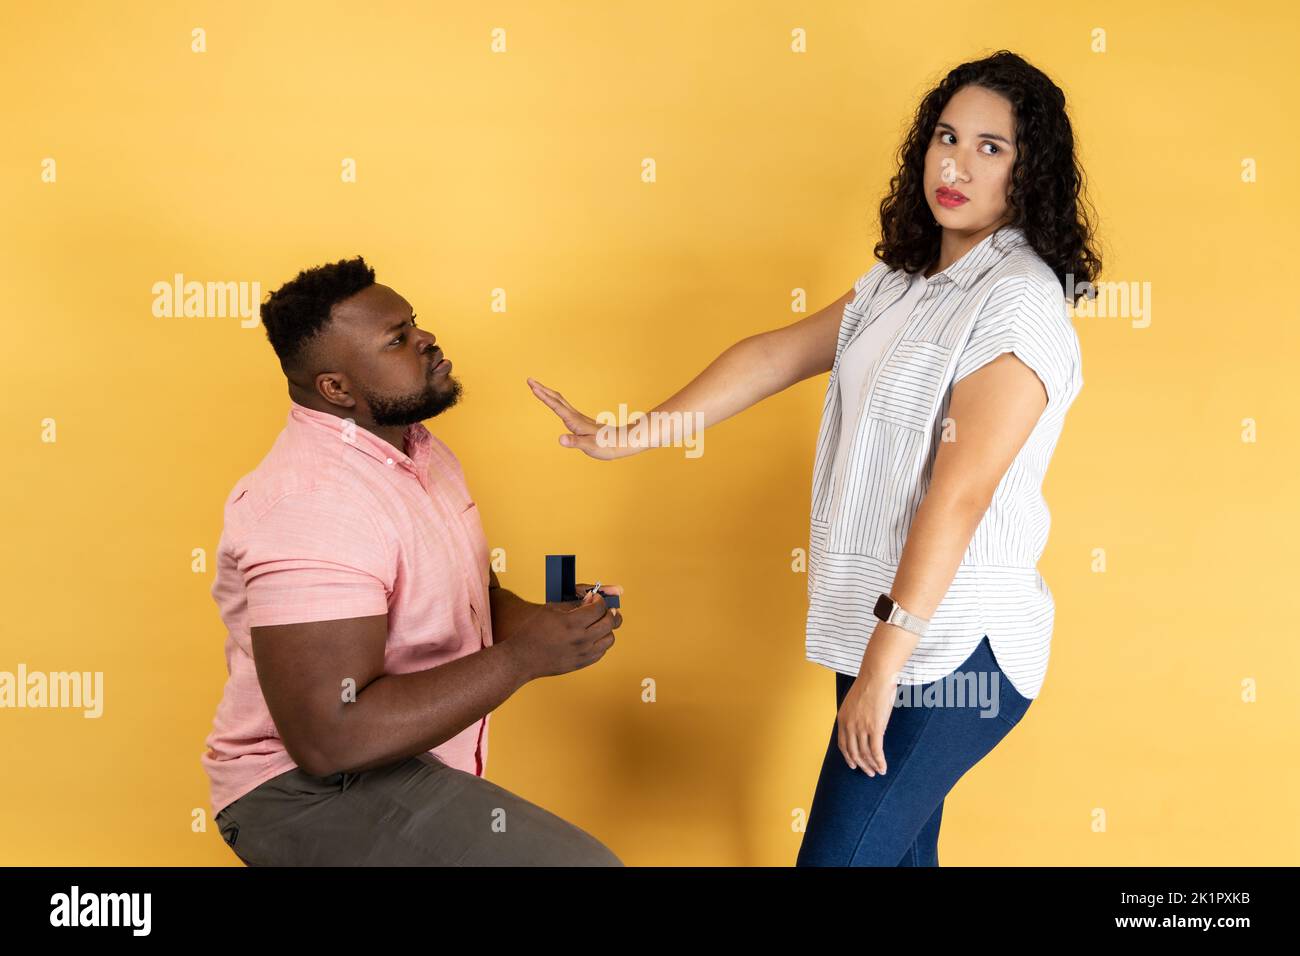 Portrait of young couple in casual clothing, man making a proposal to his girlfriend, woman refusing, showing stop palm gesture. Indoor studio shot isolated on yellow background. Stock Photo